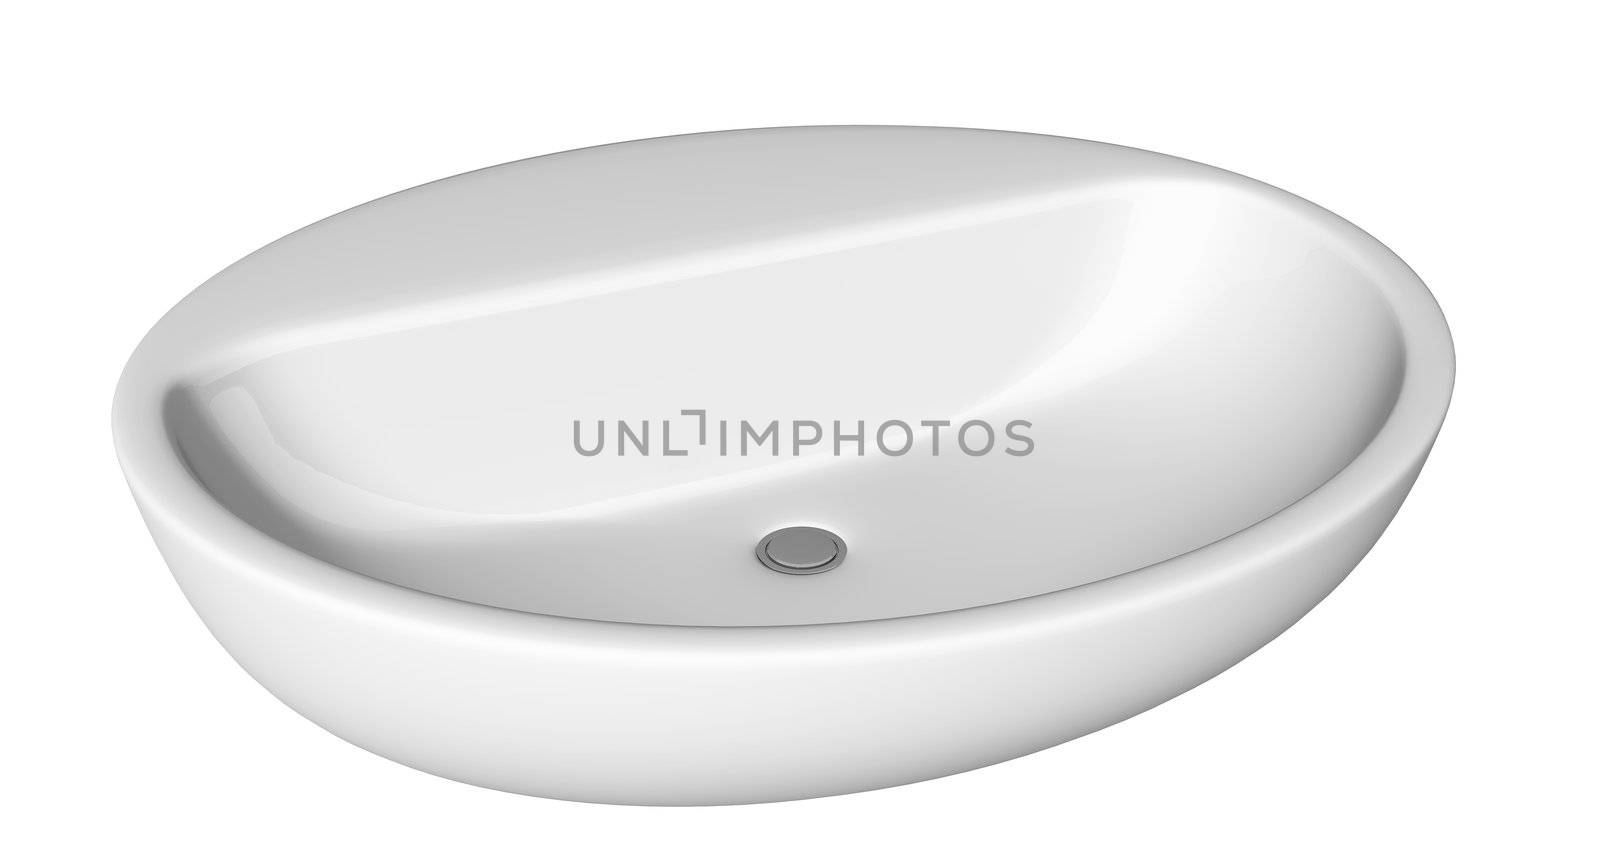 Egg-shaped and shallow washbasin or sink by Morphart